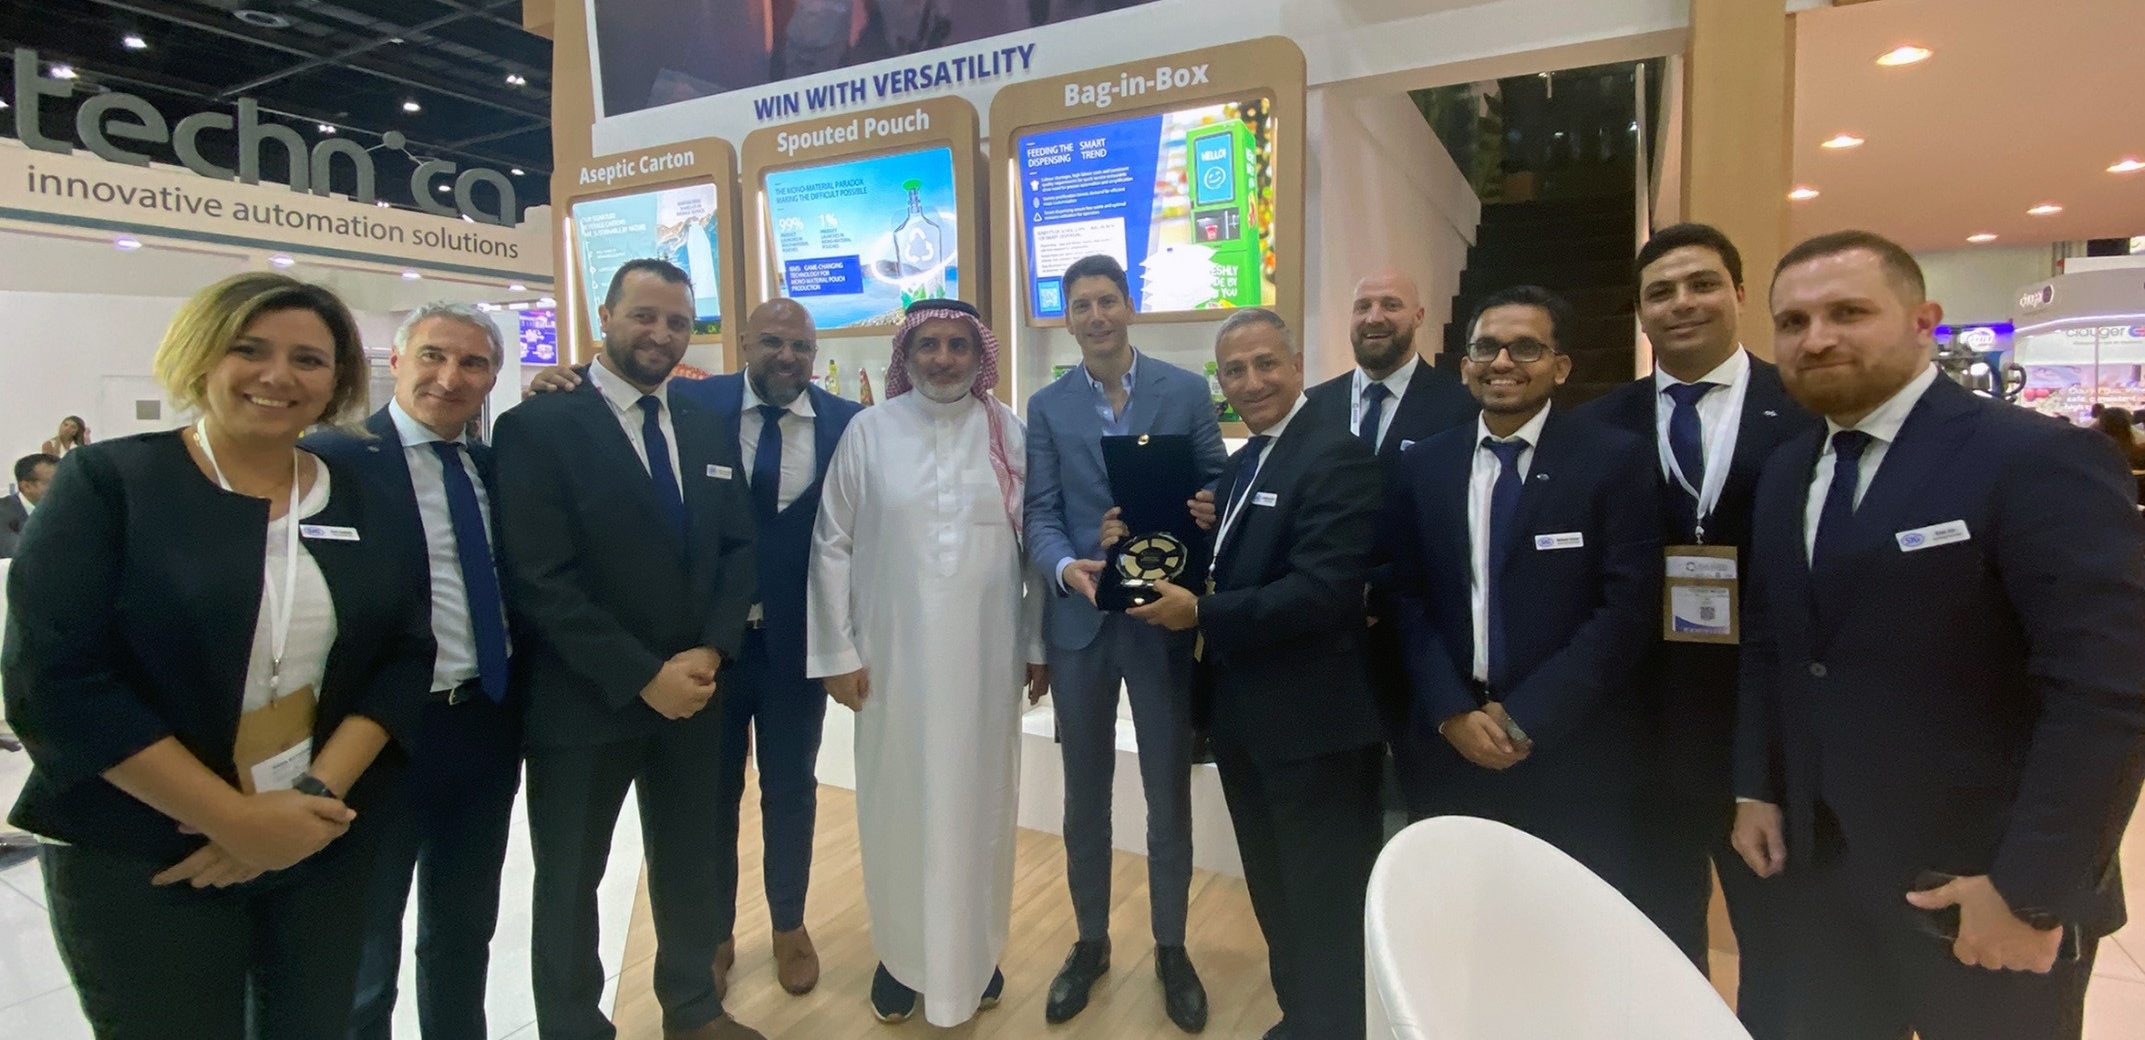 SIG receives “Breakthrough Food Technology Award” from Gulfood Manufacturing 2022